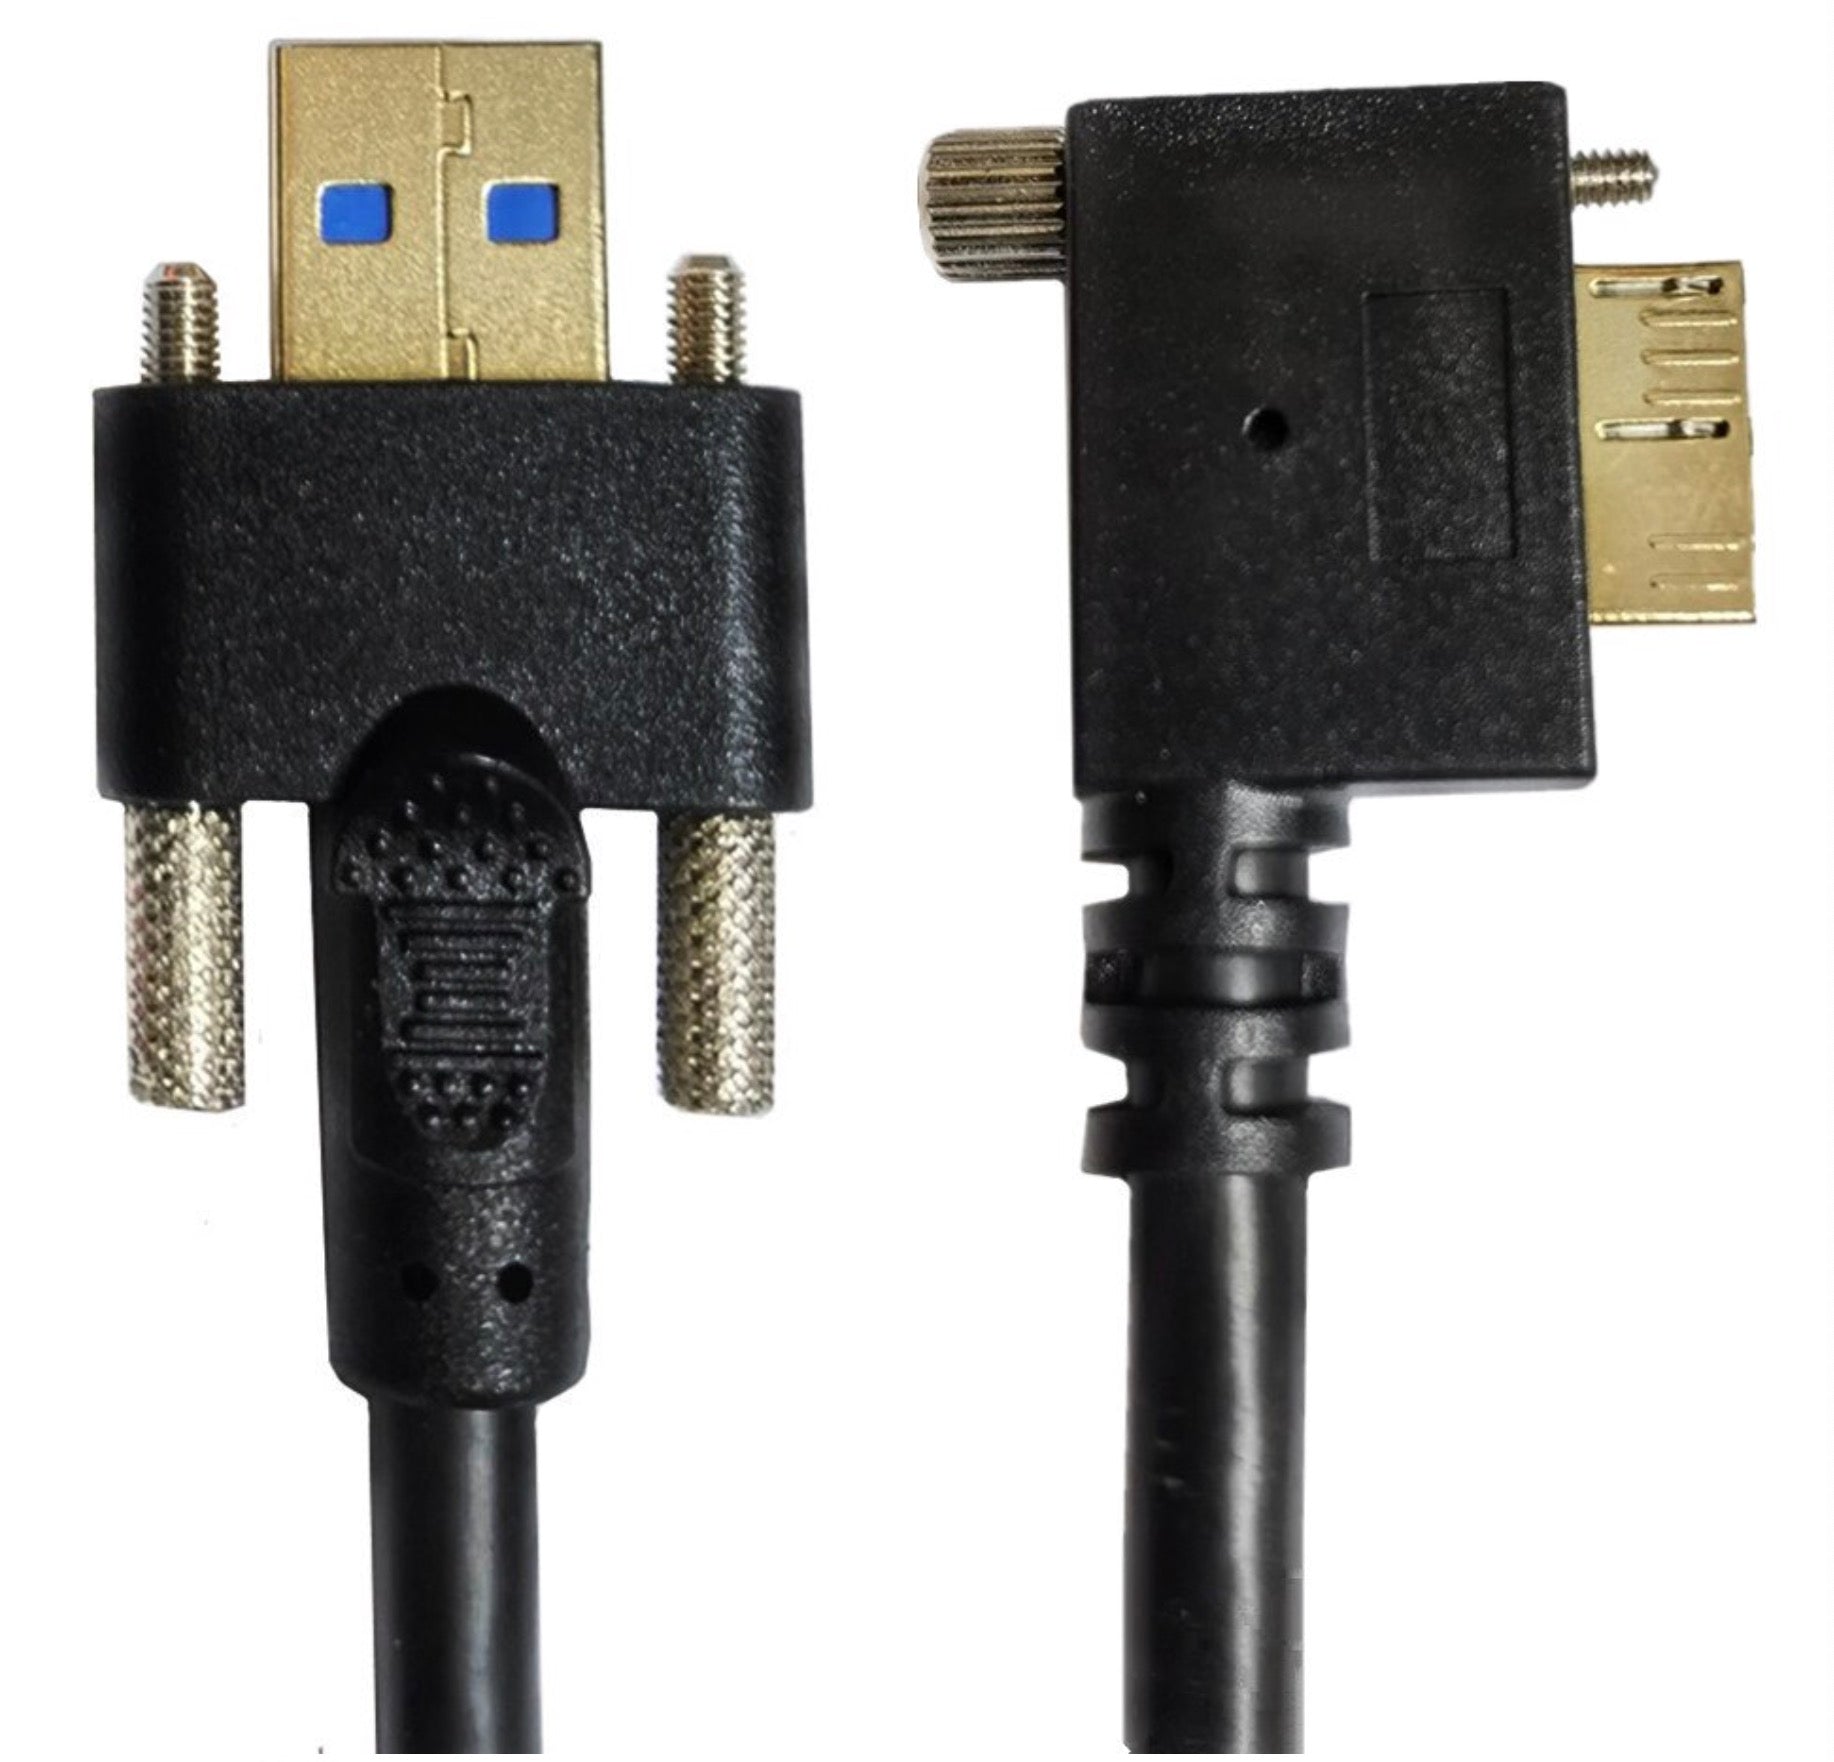 USB 3.0 A Male to Micro B Right Angle Male with Dual M3 Screw Locking Cable